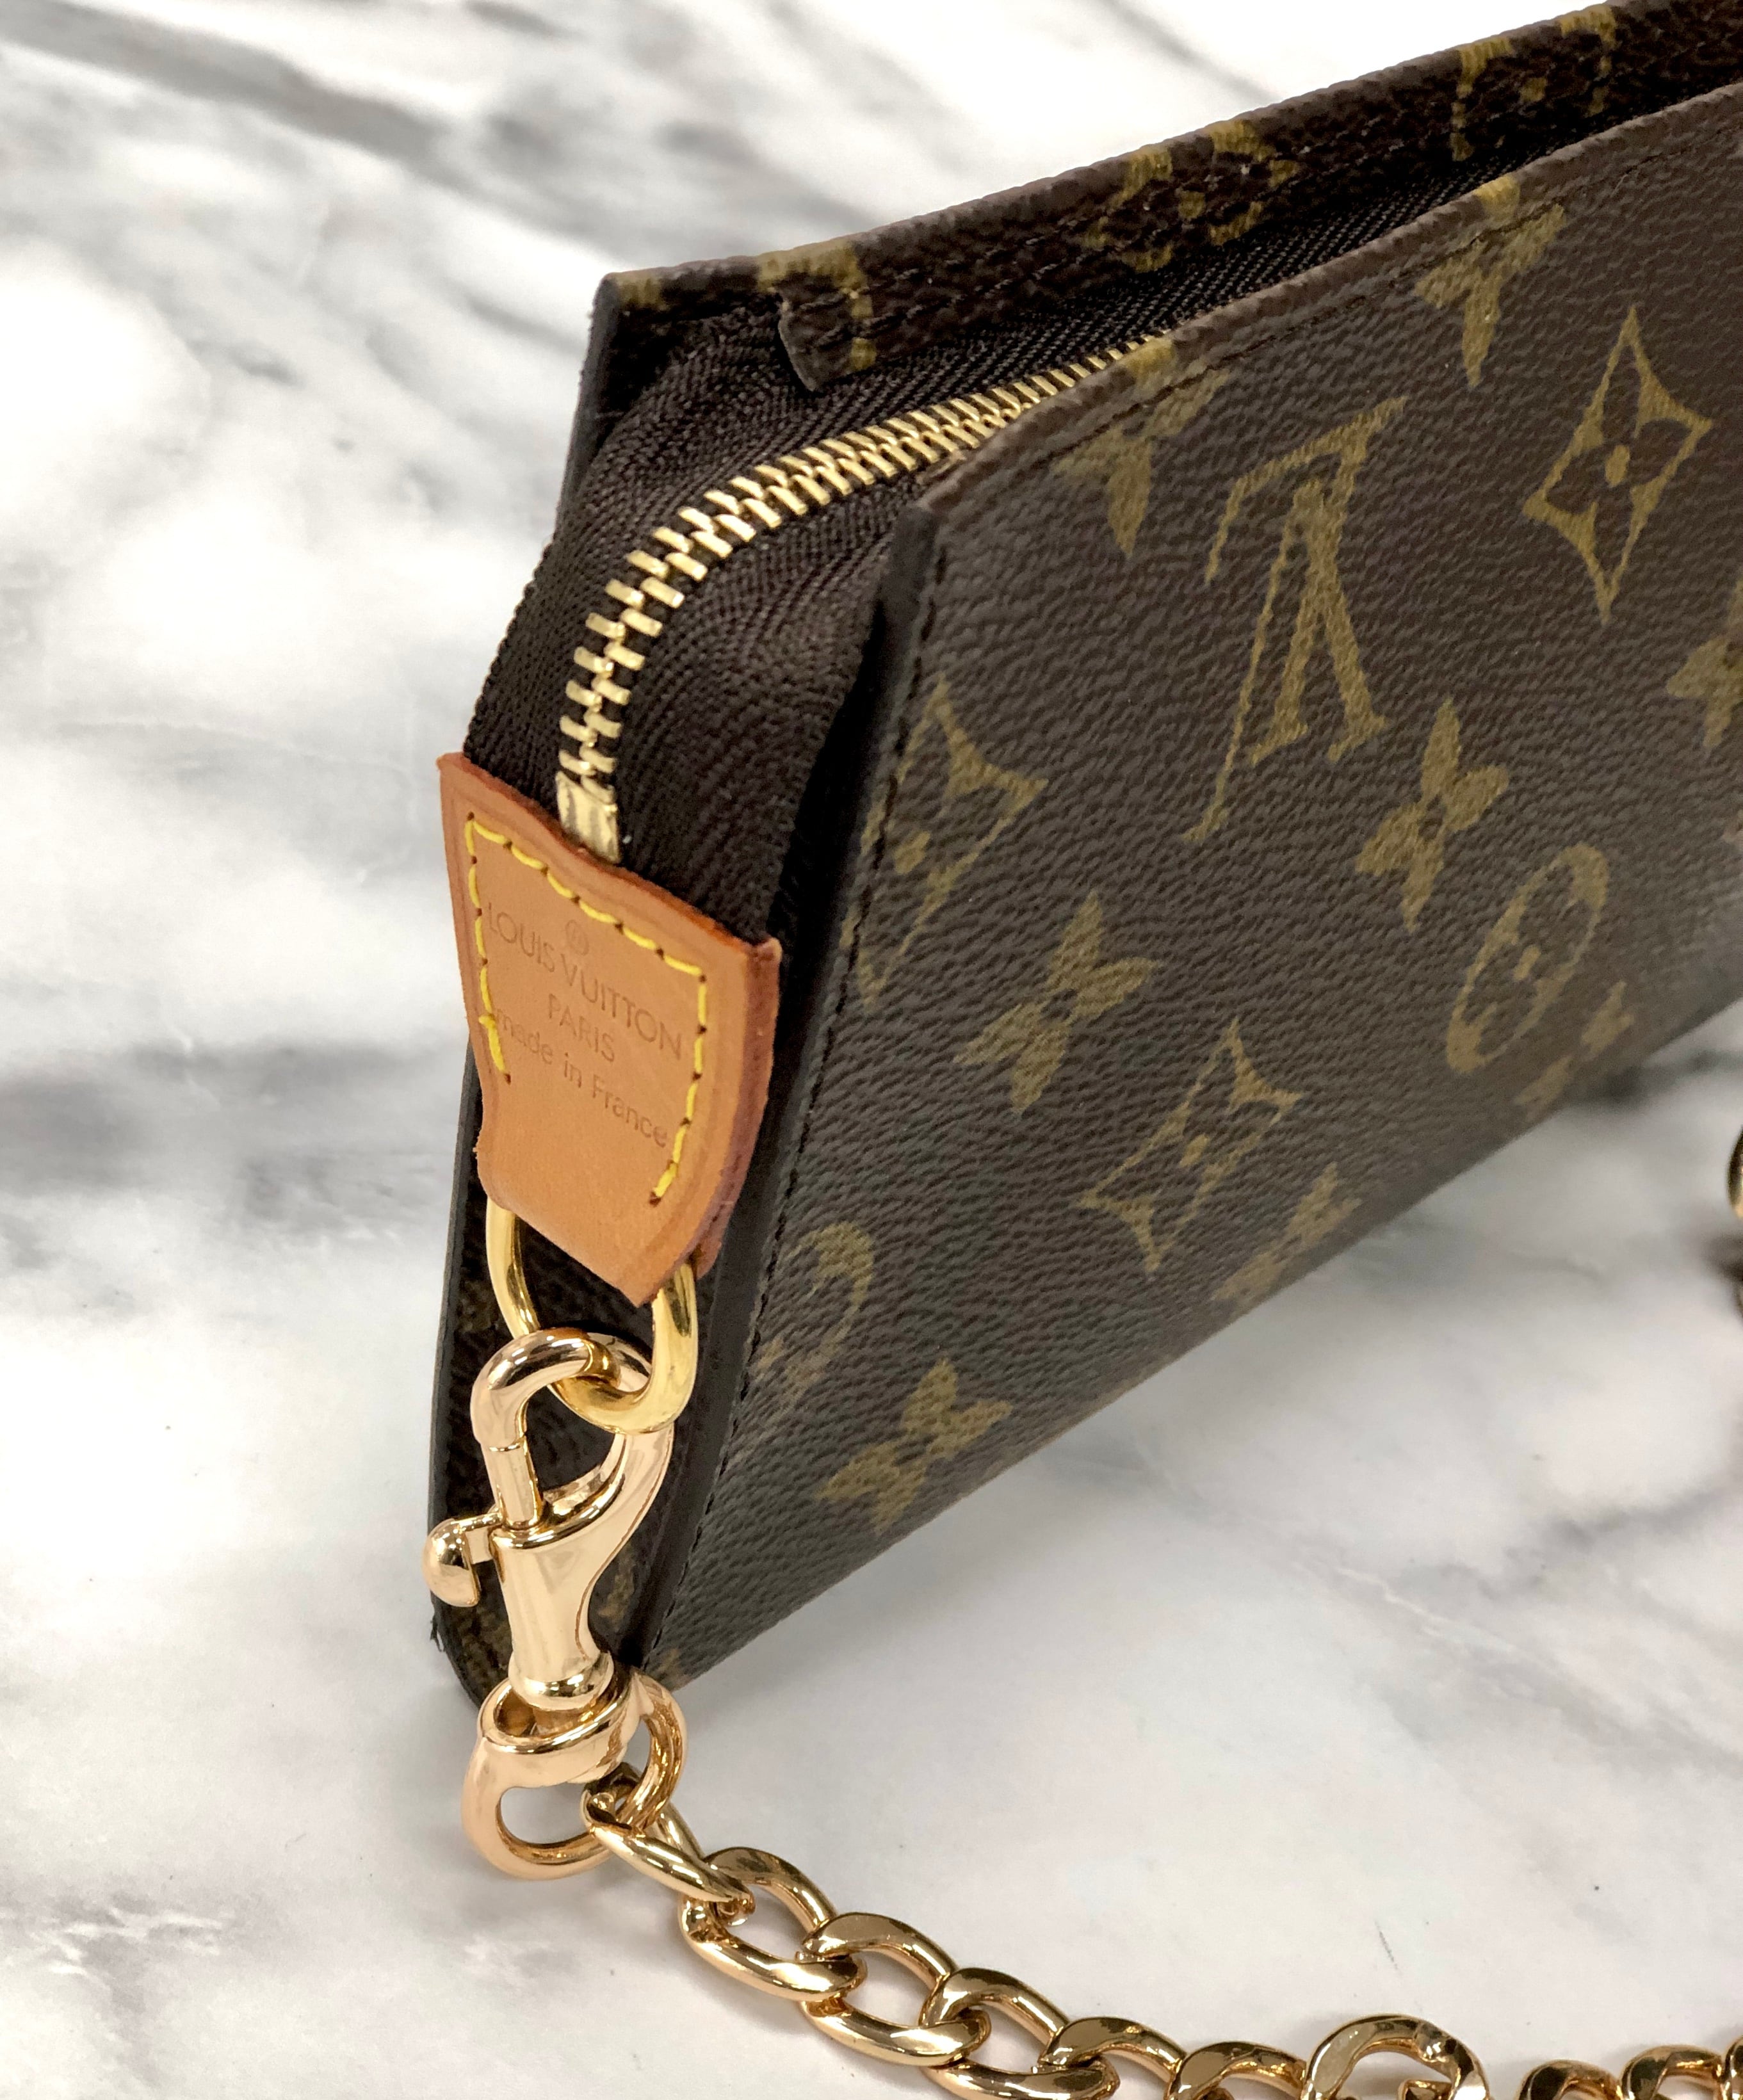 LOUIS VUITTON　ルイ ヴィトン　モノグラム　チェーン　アクセサリーポーチ　ミニバッグ　ブラウン　vintage　ヴィンテージ　オールド　 x3u8p6   VintageShop solo powered by BASE